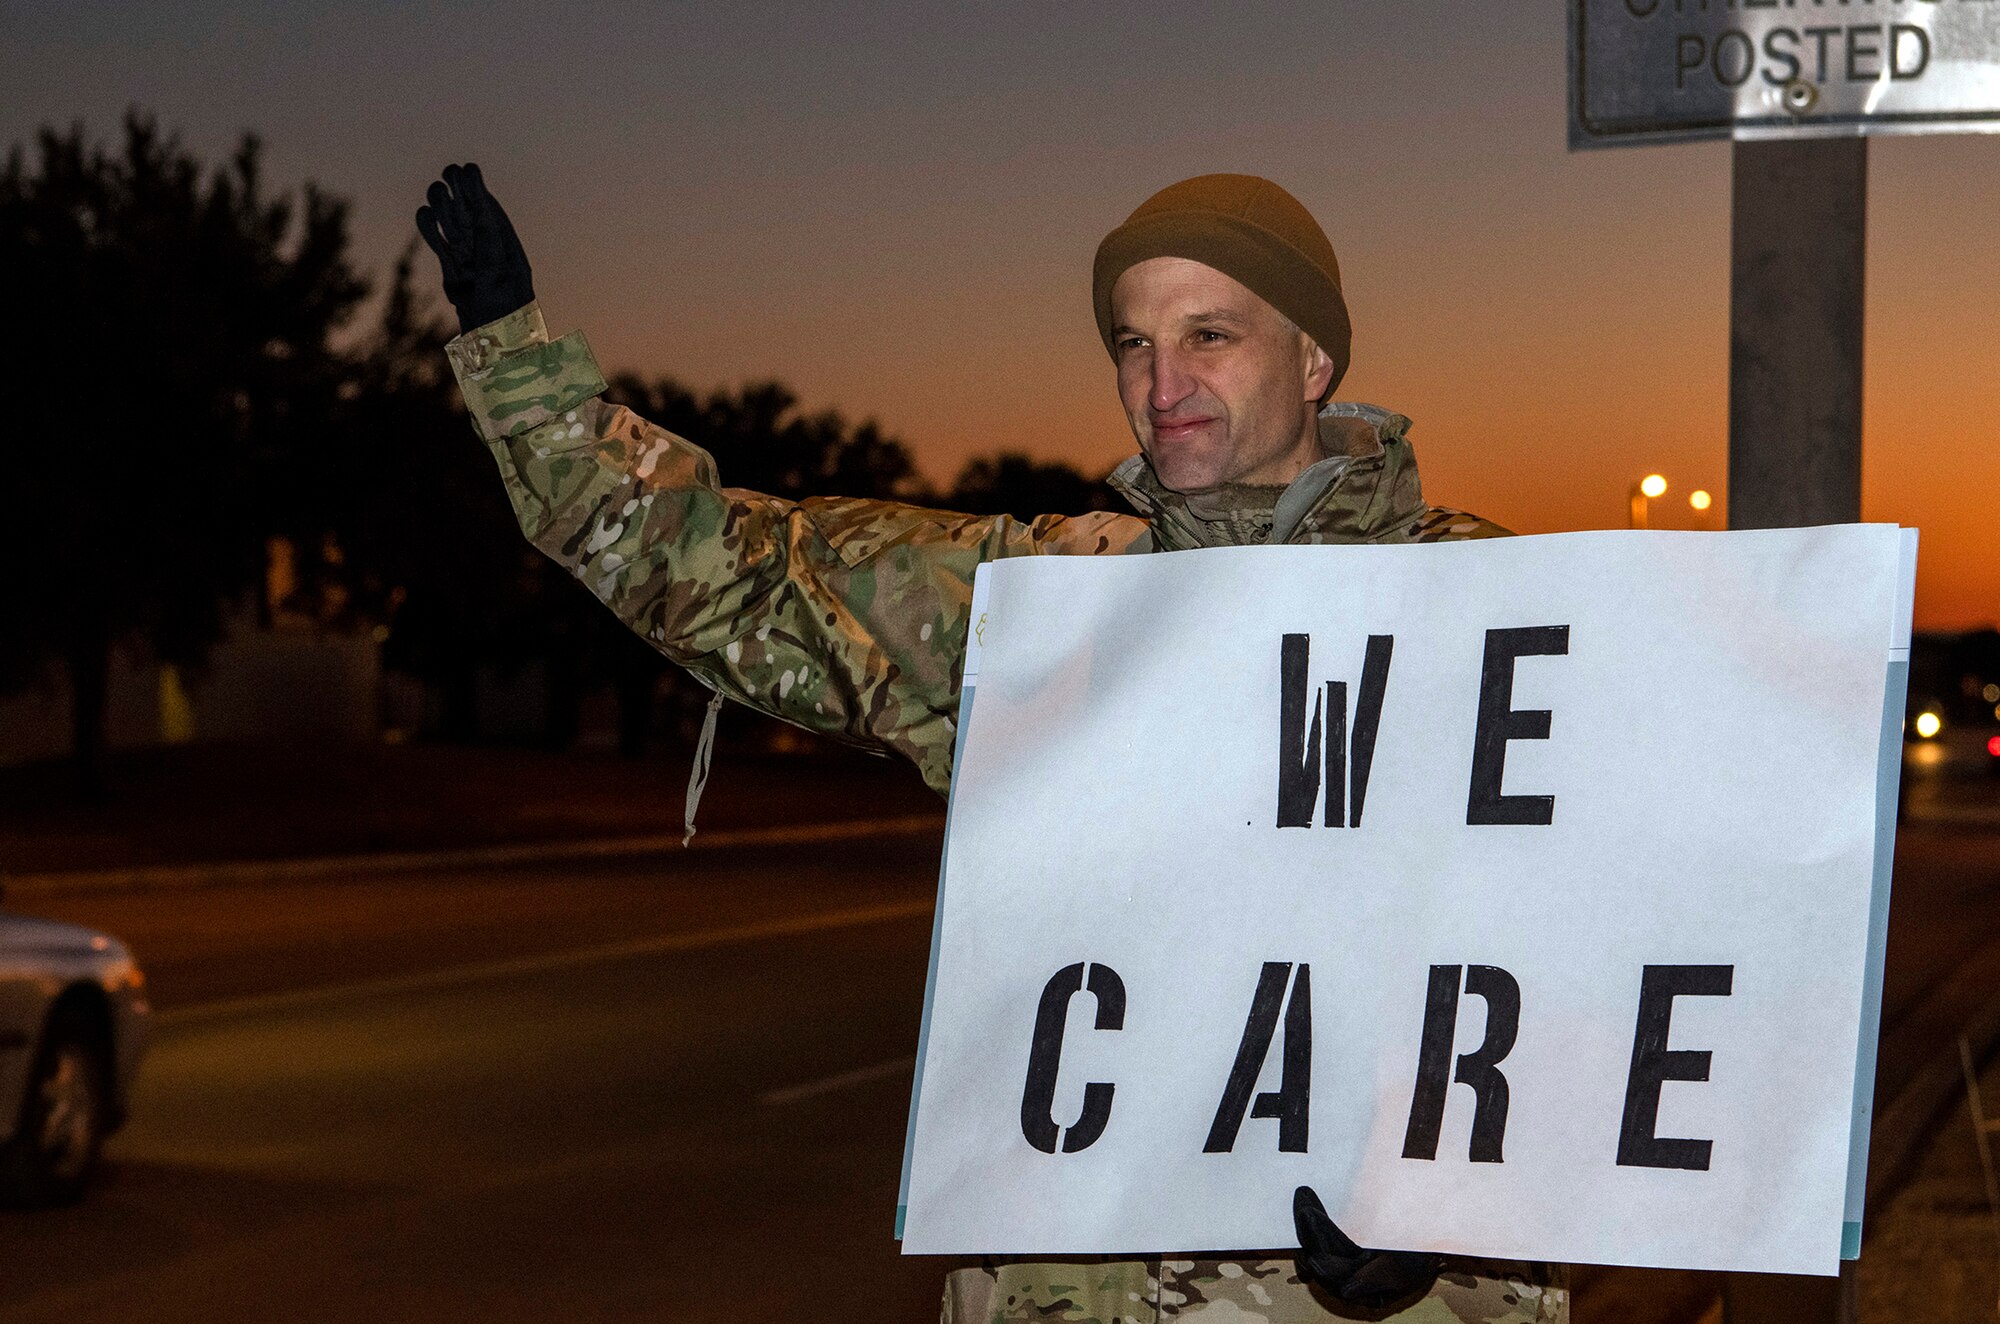 Lt. Col. Scott Christensen, 331st Training Squadron commander, holds a positive message of support at a base gate during the morning inbound commute as part of their new initiative, “We Care,” at Joint Base San Antonio-Lackland, Texas, Dec. 18, 2019. The initiative involved 37th Training Wing military and civilian members spending the morning at various gates letting each person know that they stand together in support of those struggling with depression and thoughts of suicide by holding a positive message of support and handing out over 400 candy canes. If you are struggling with thoughts of suicide, please go directly to the Mental Health Clinic or to your closest Emergency Room. You can also reach the National Suicide Prevention Lifeline at 1-800-273-8255.